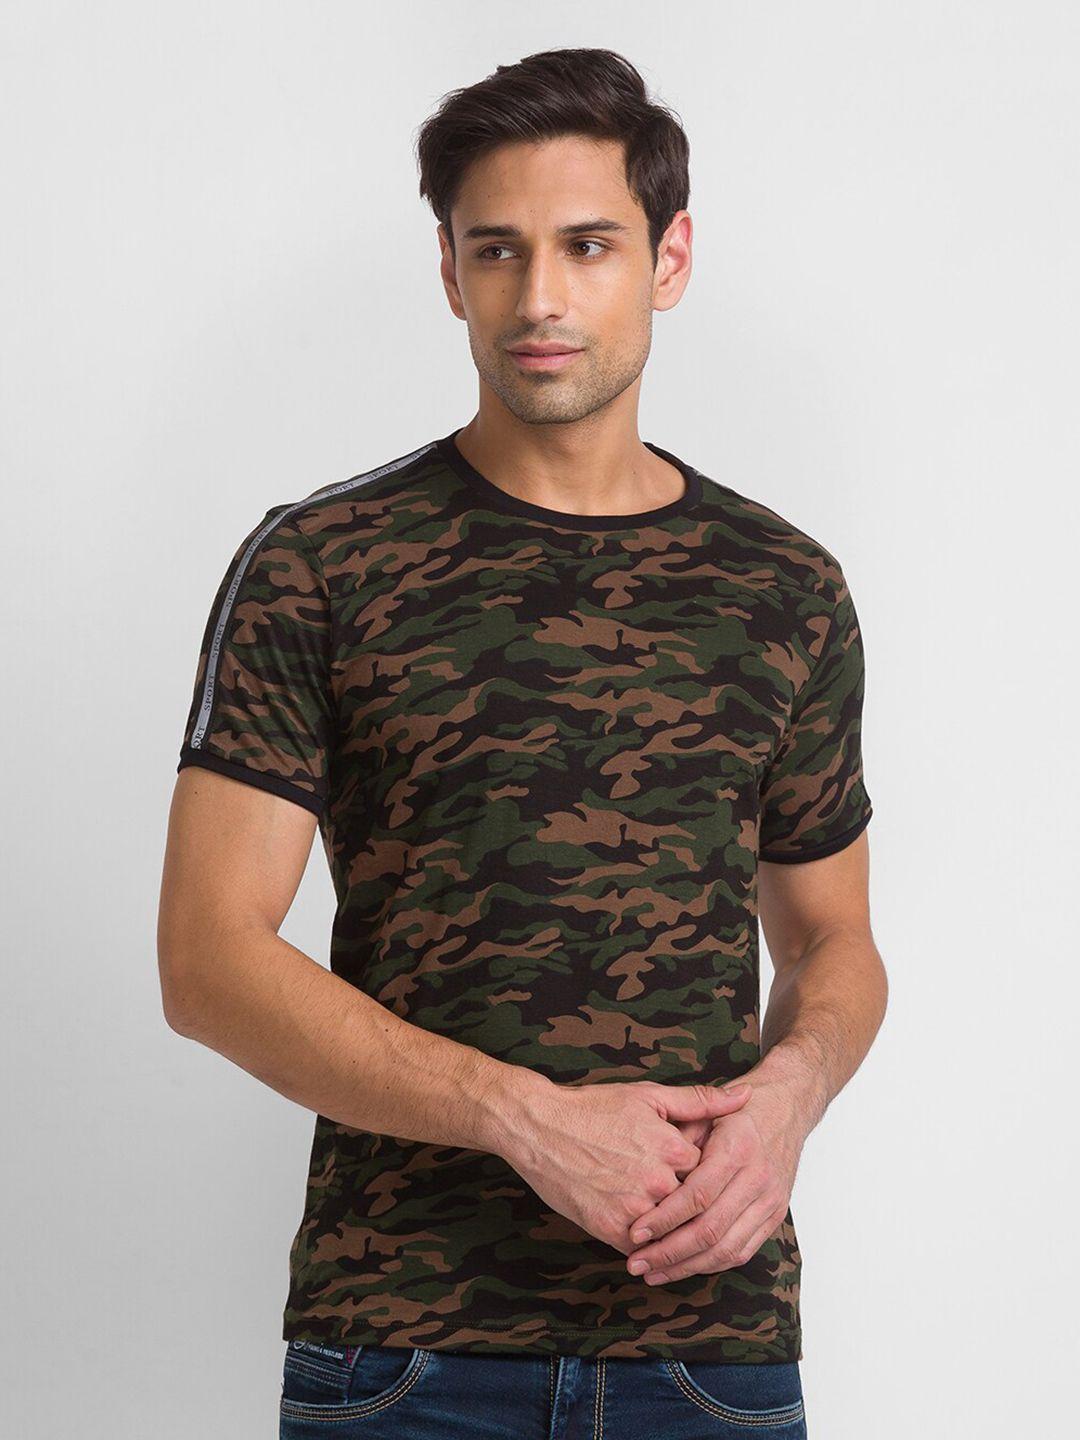 globus-men-olive-green-camouflage-printed-cotton-t-shirt